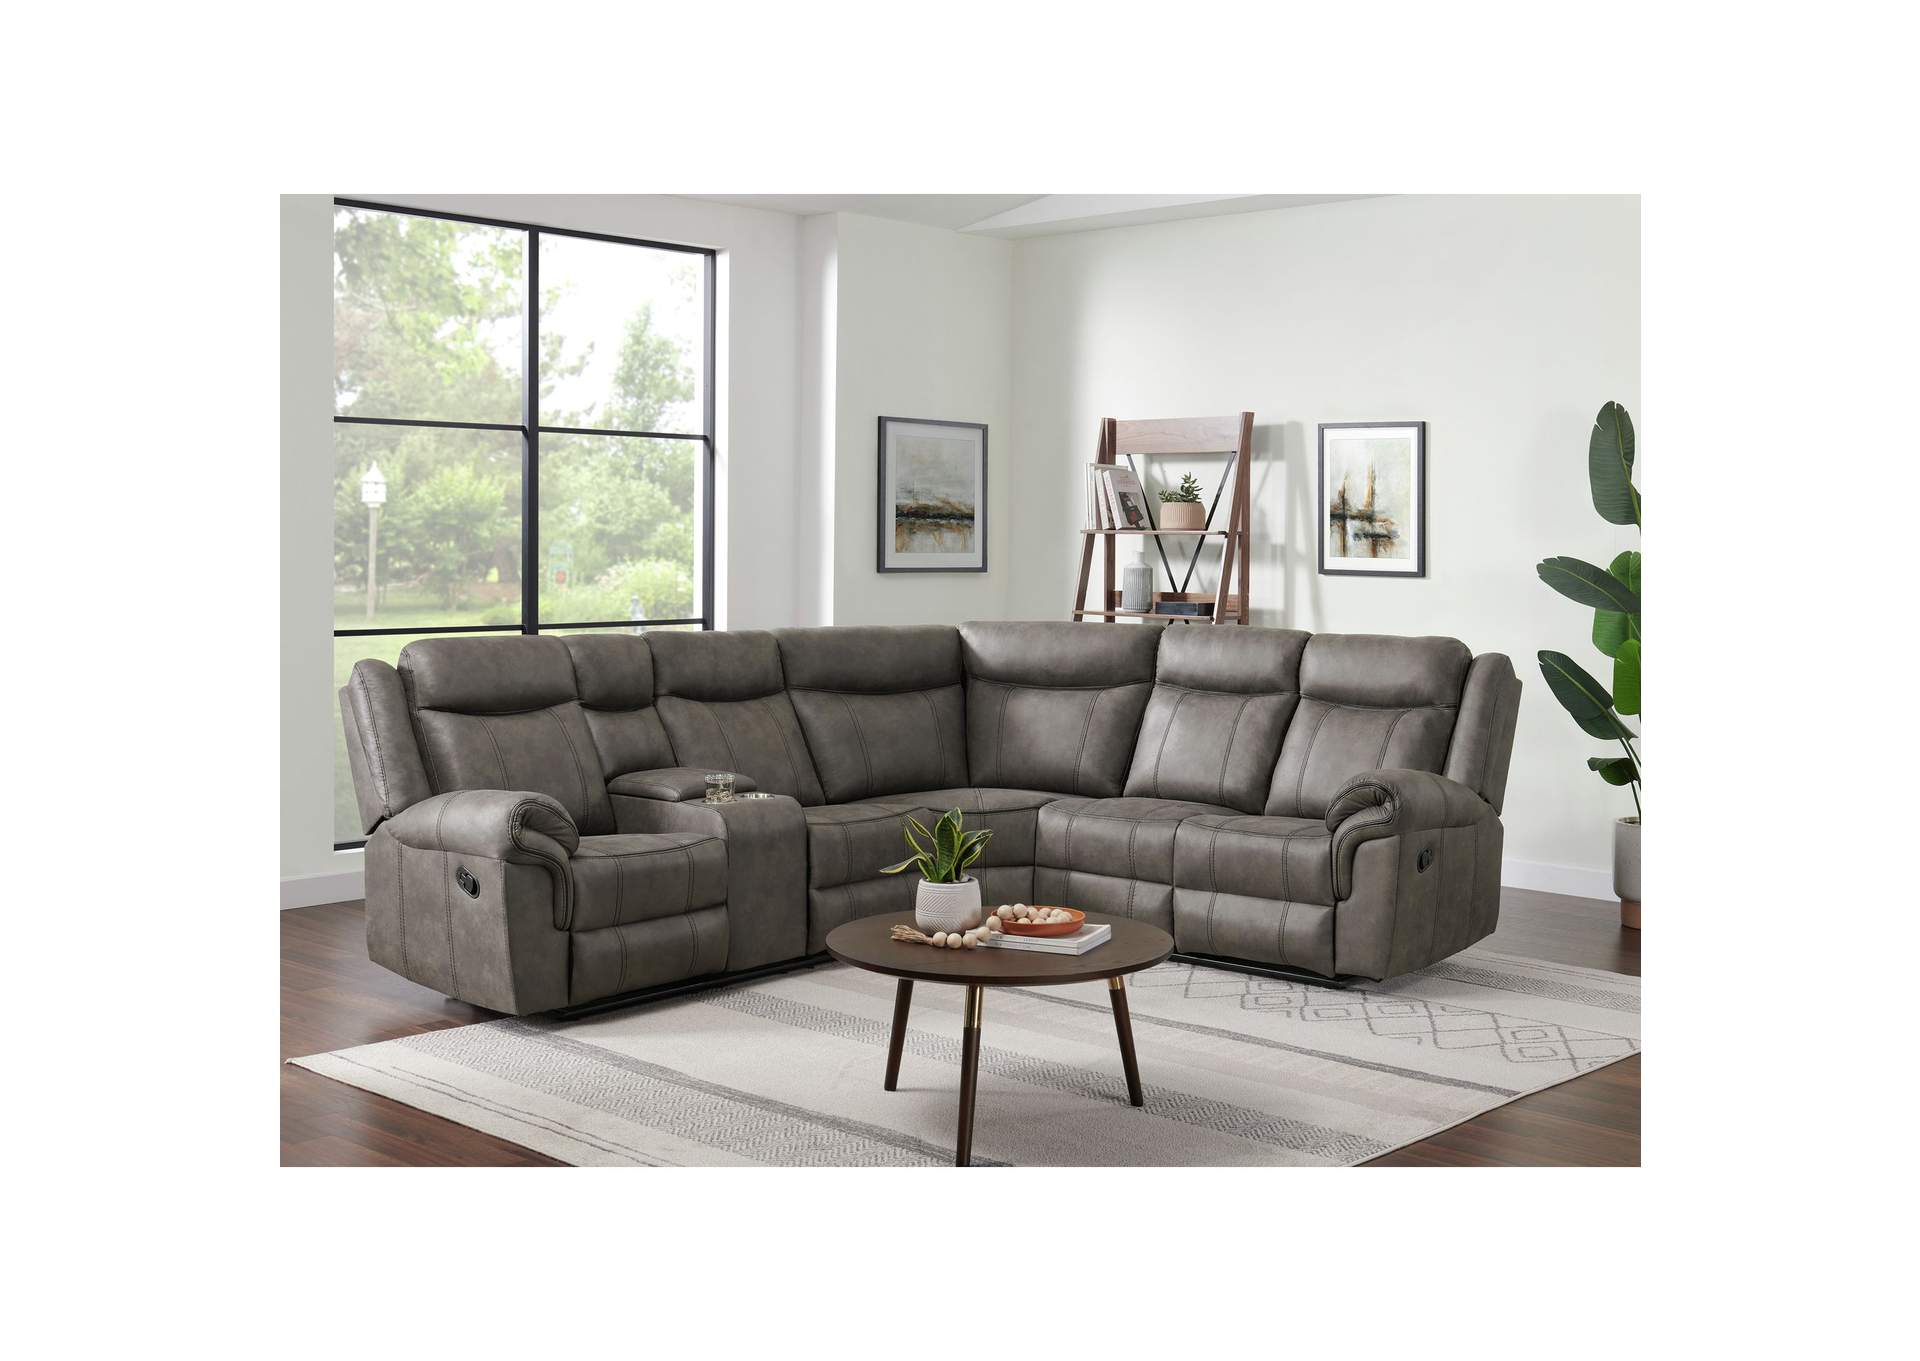 Galloway Sectional Right Hand Facing Loveseat In Js1233With 168 Stone,Elements